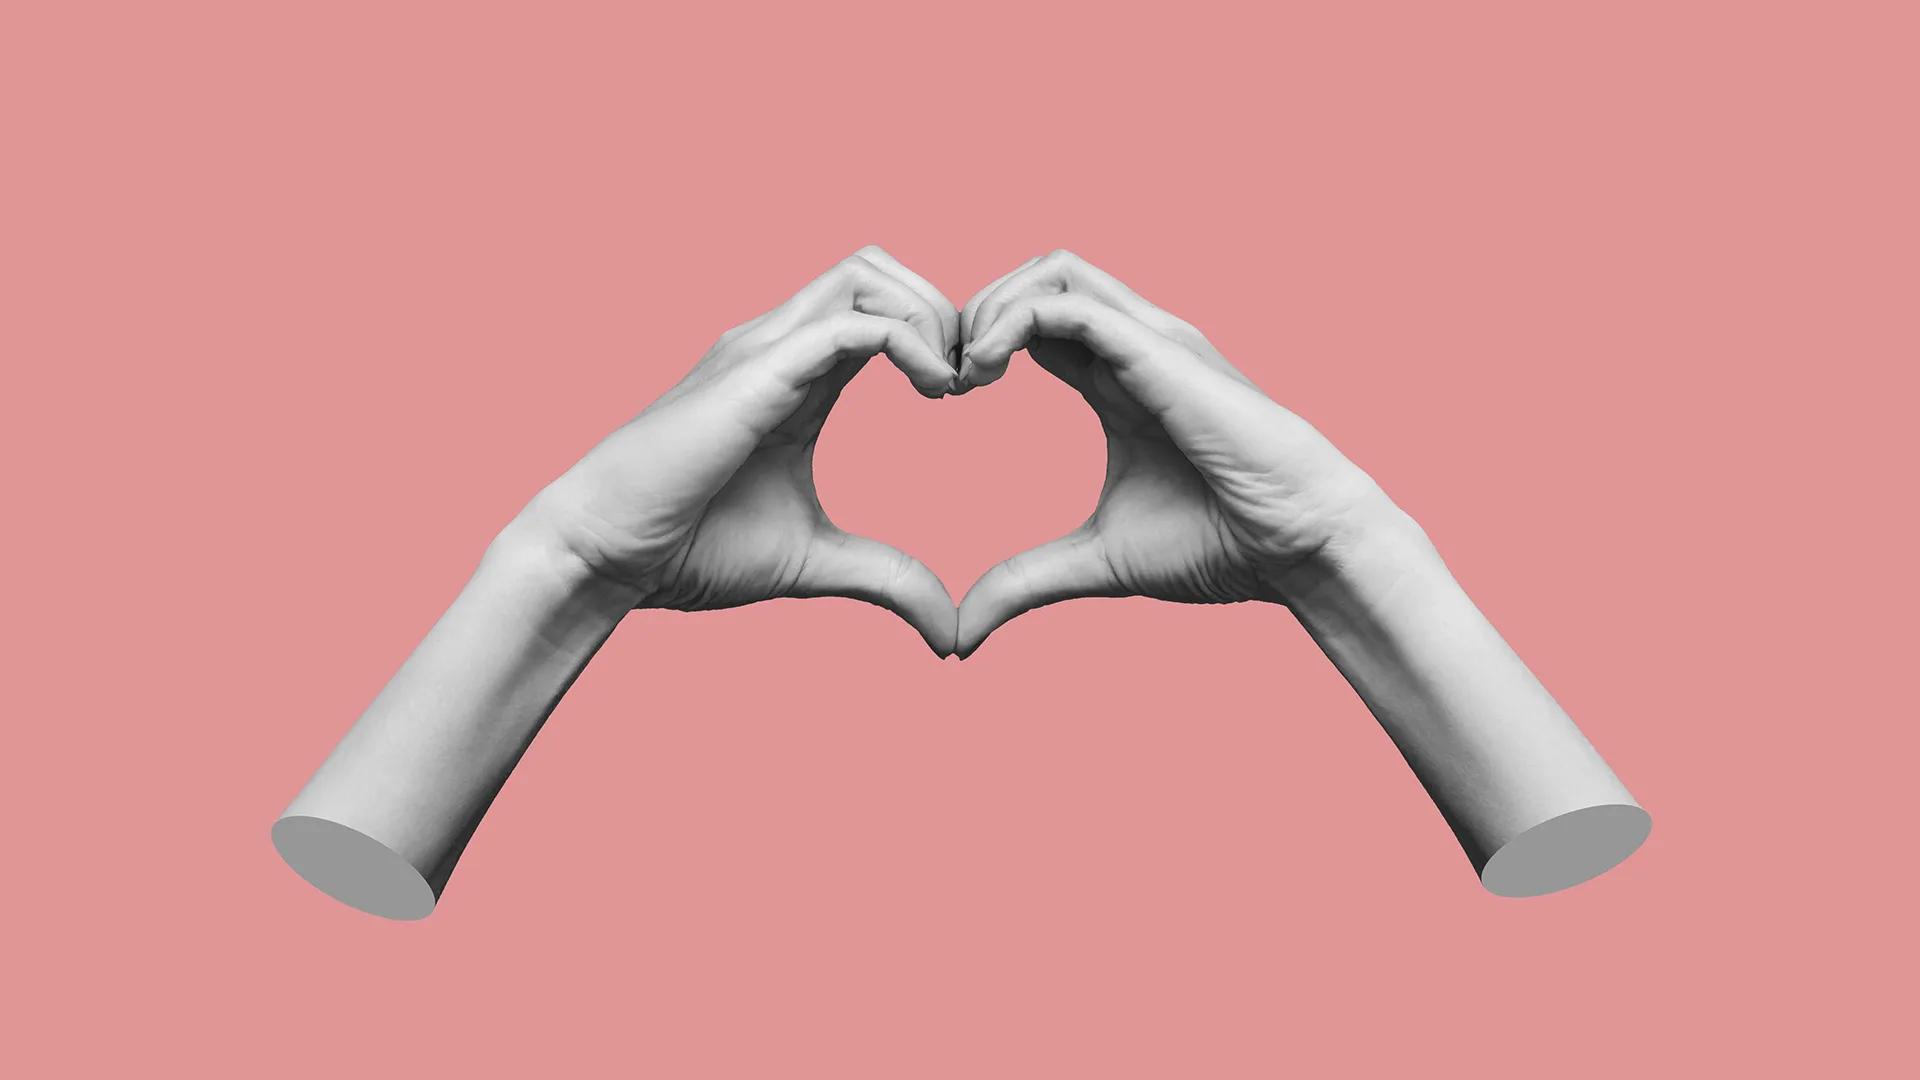 Grey hands held together to form a heart on a pink background.